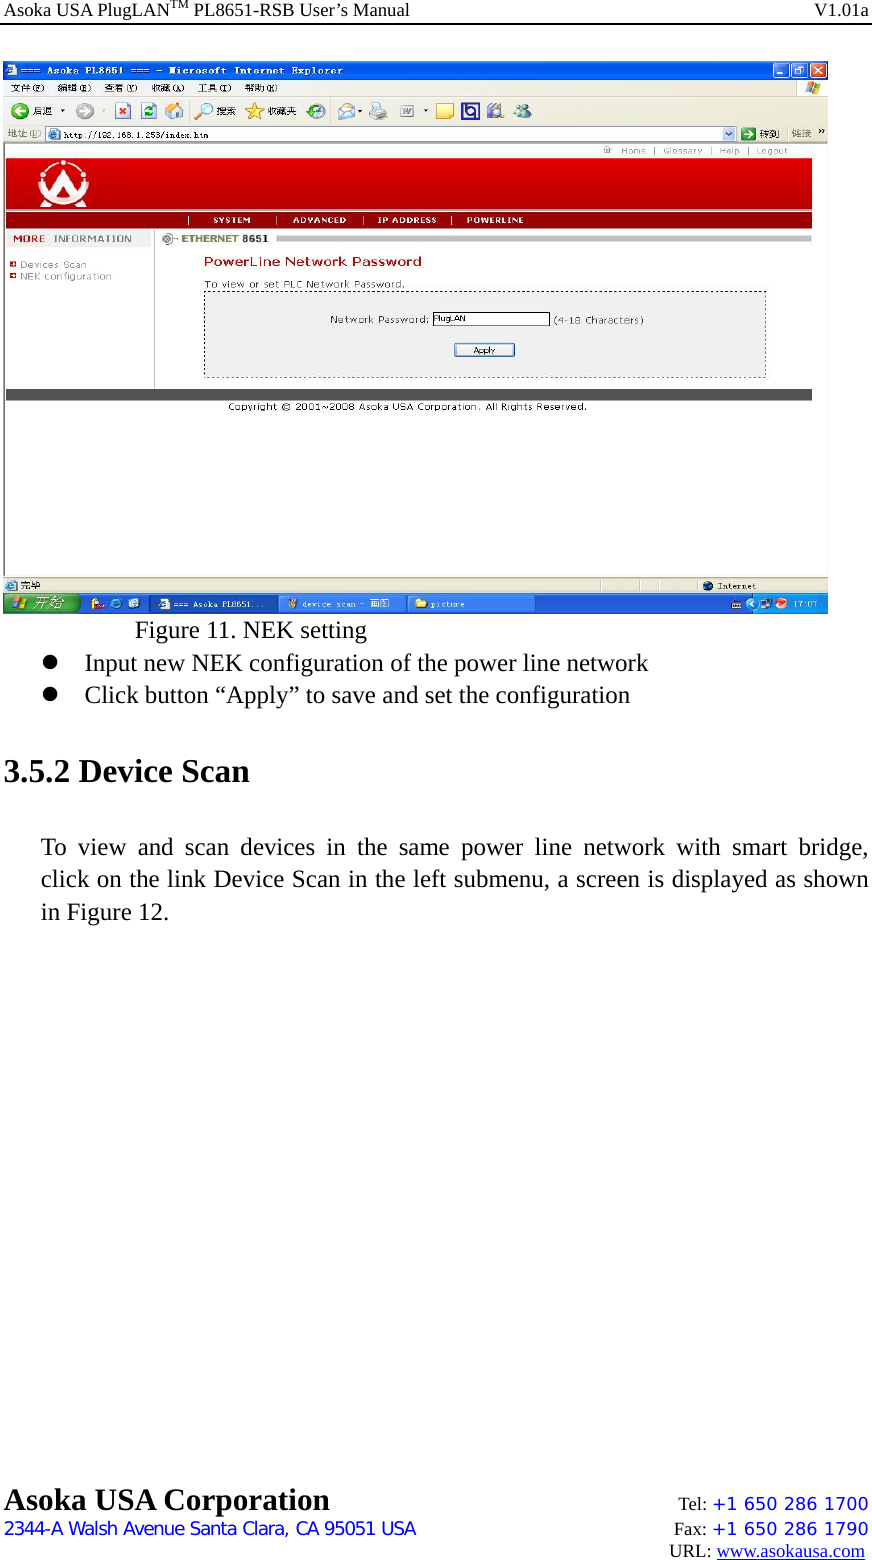 Asoka USA PlugLANTM PL8651-RSB User’s Manual    V1.01a     Figure 11. NEK setting  z Input new NEK configuration of the power line network z Click button “Apply” to save and set the configuration 3.5.2 Device Scan To view and scan devices in the same power line network with smart bridge,  click on the link Device Scan in the left submenu, a screen is displayed as shown in Figure 12. Asoka USA Corporation    Tel: +1 650 286 1700    2344-A Walsh Avenue Santa Clara, CA 95051 USA   Fax: +1 650 286 1790                                                                                     URL: www.asokausa.com 